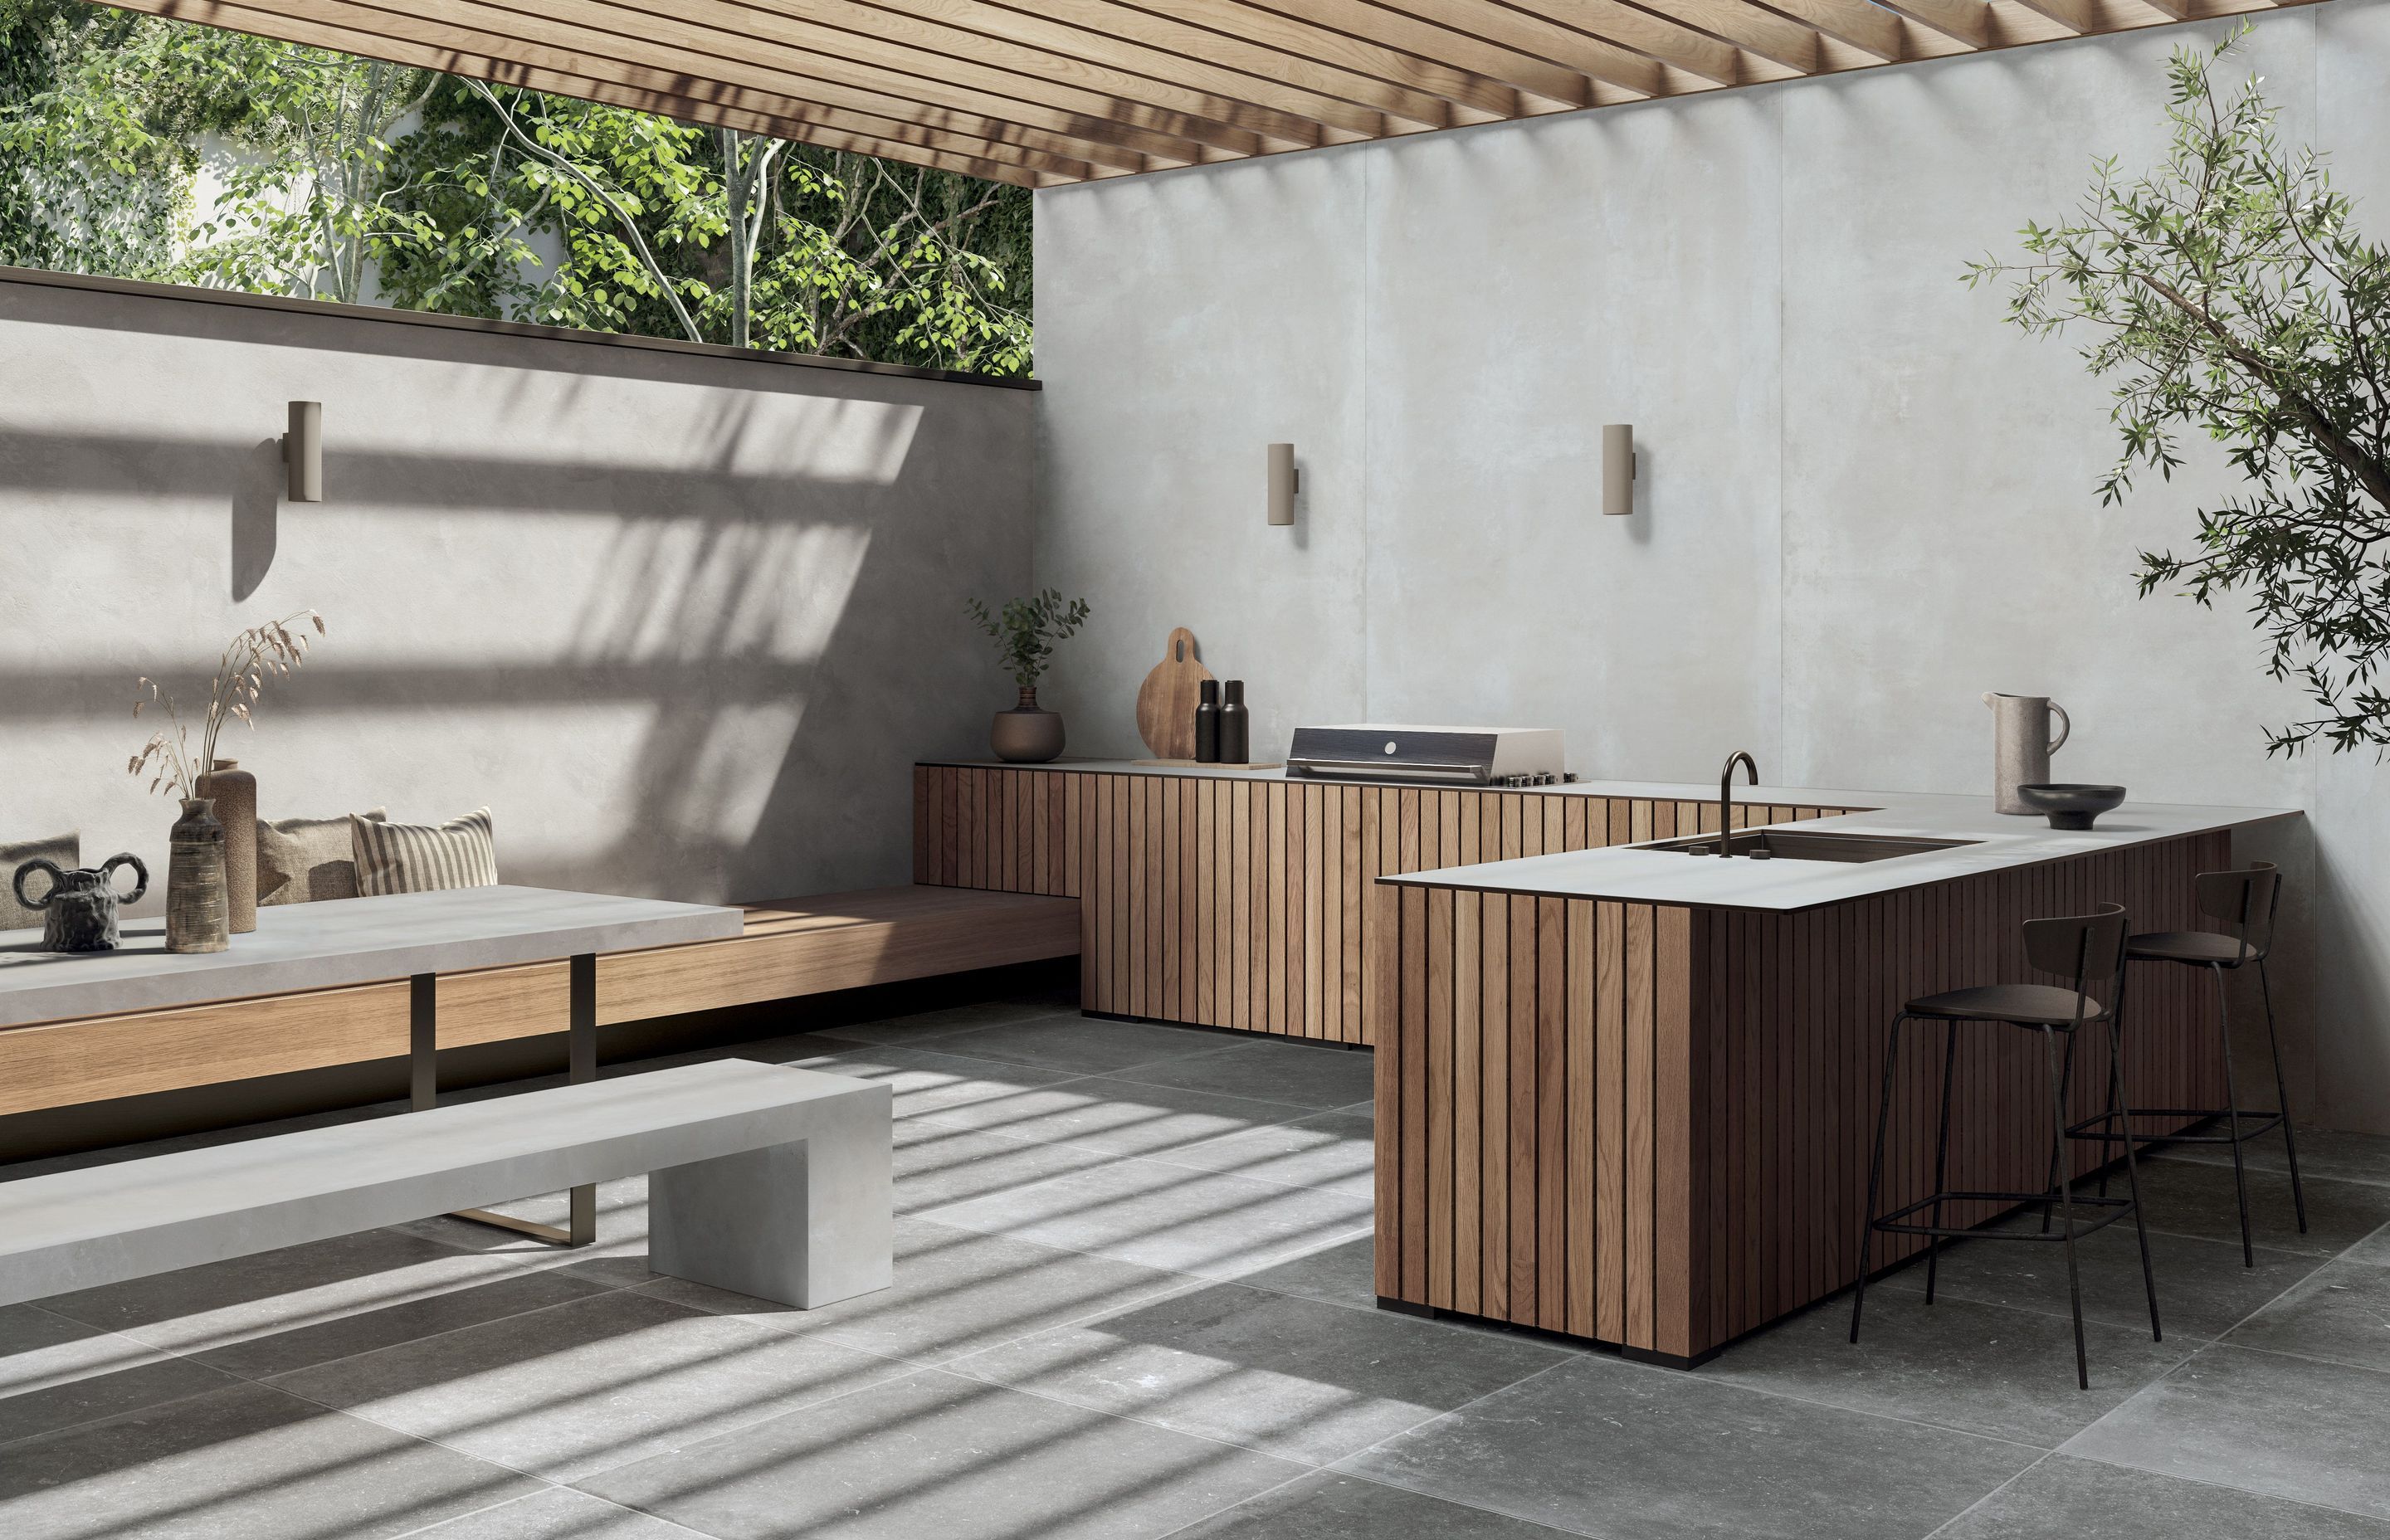 Porcelain slabs can be used outdoors for bench tops, walls, furniture and more.